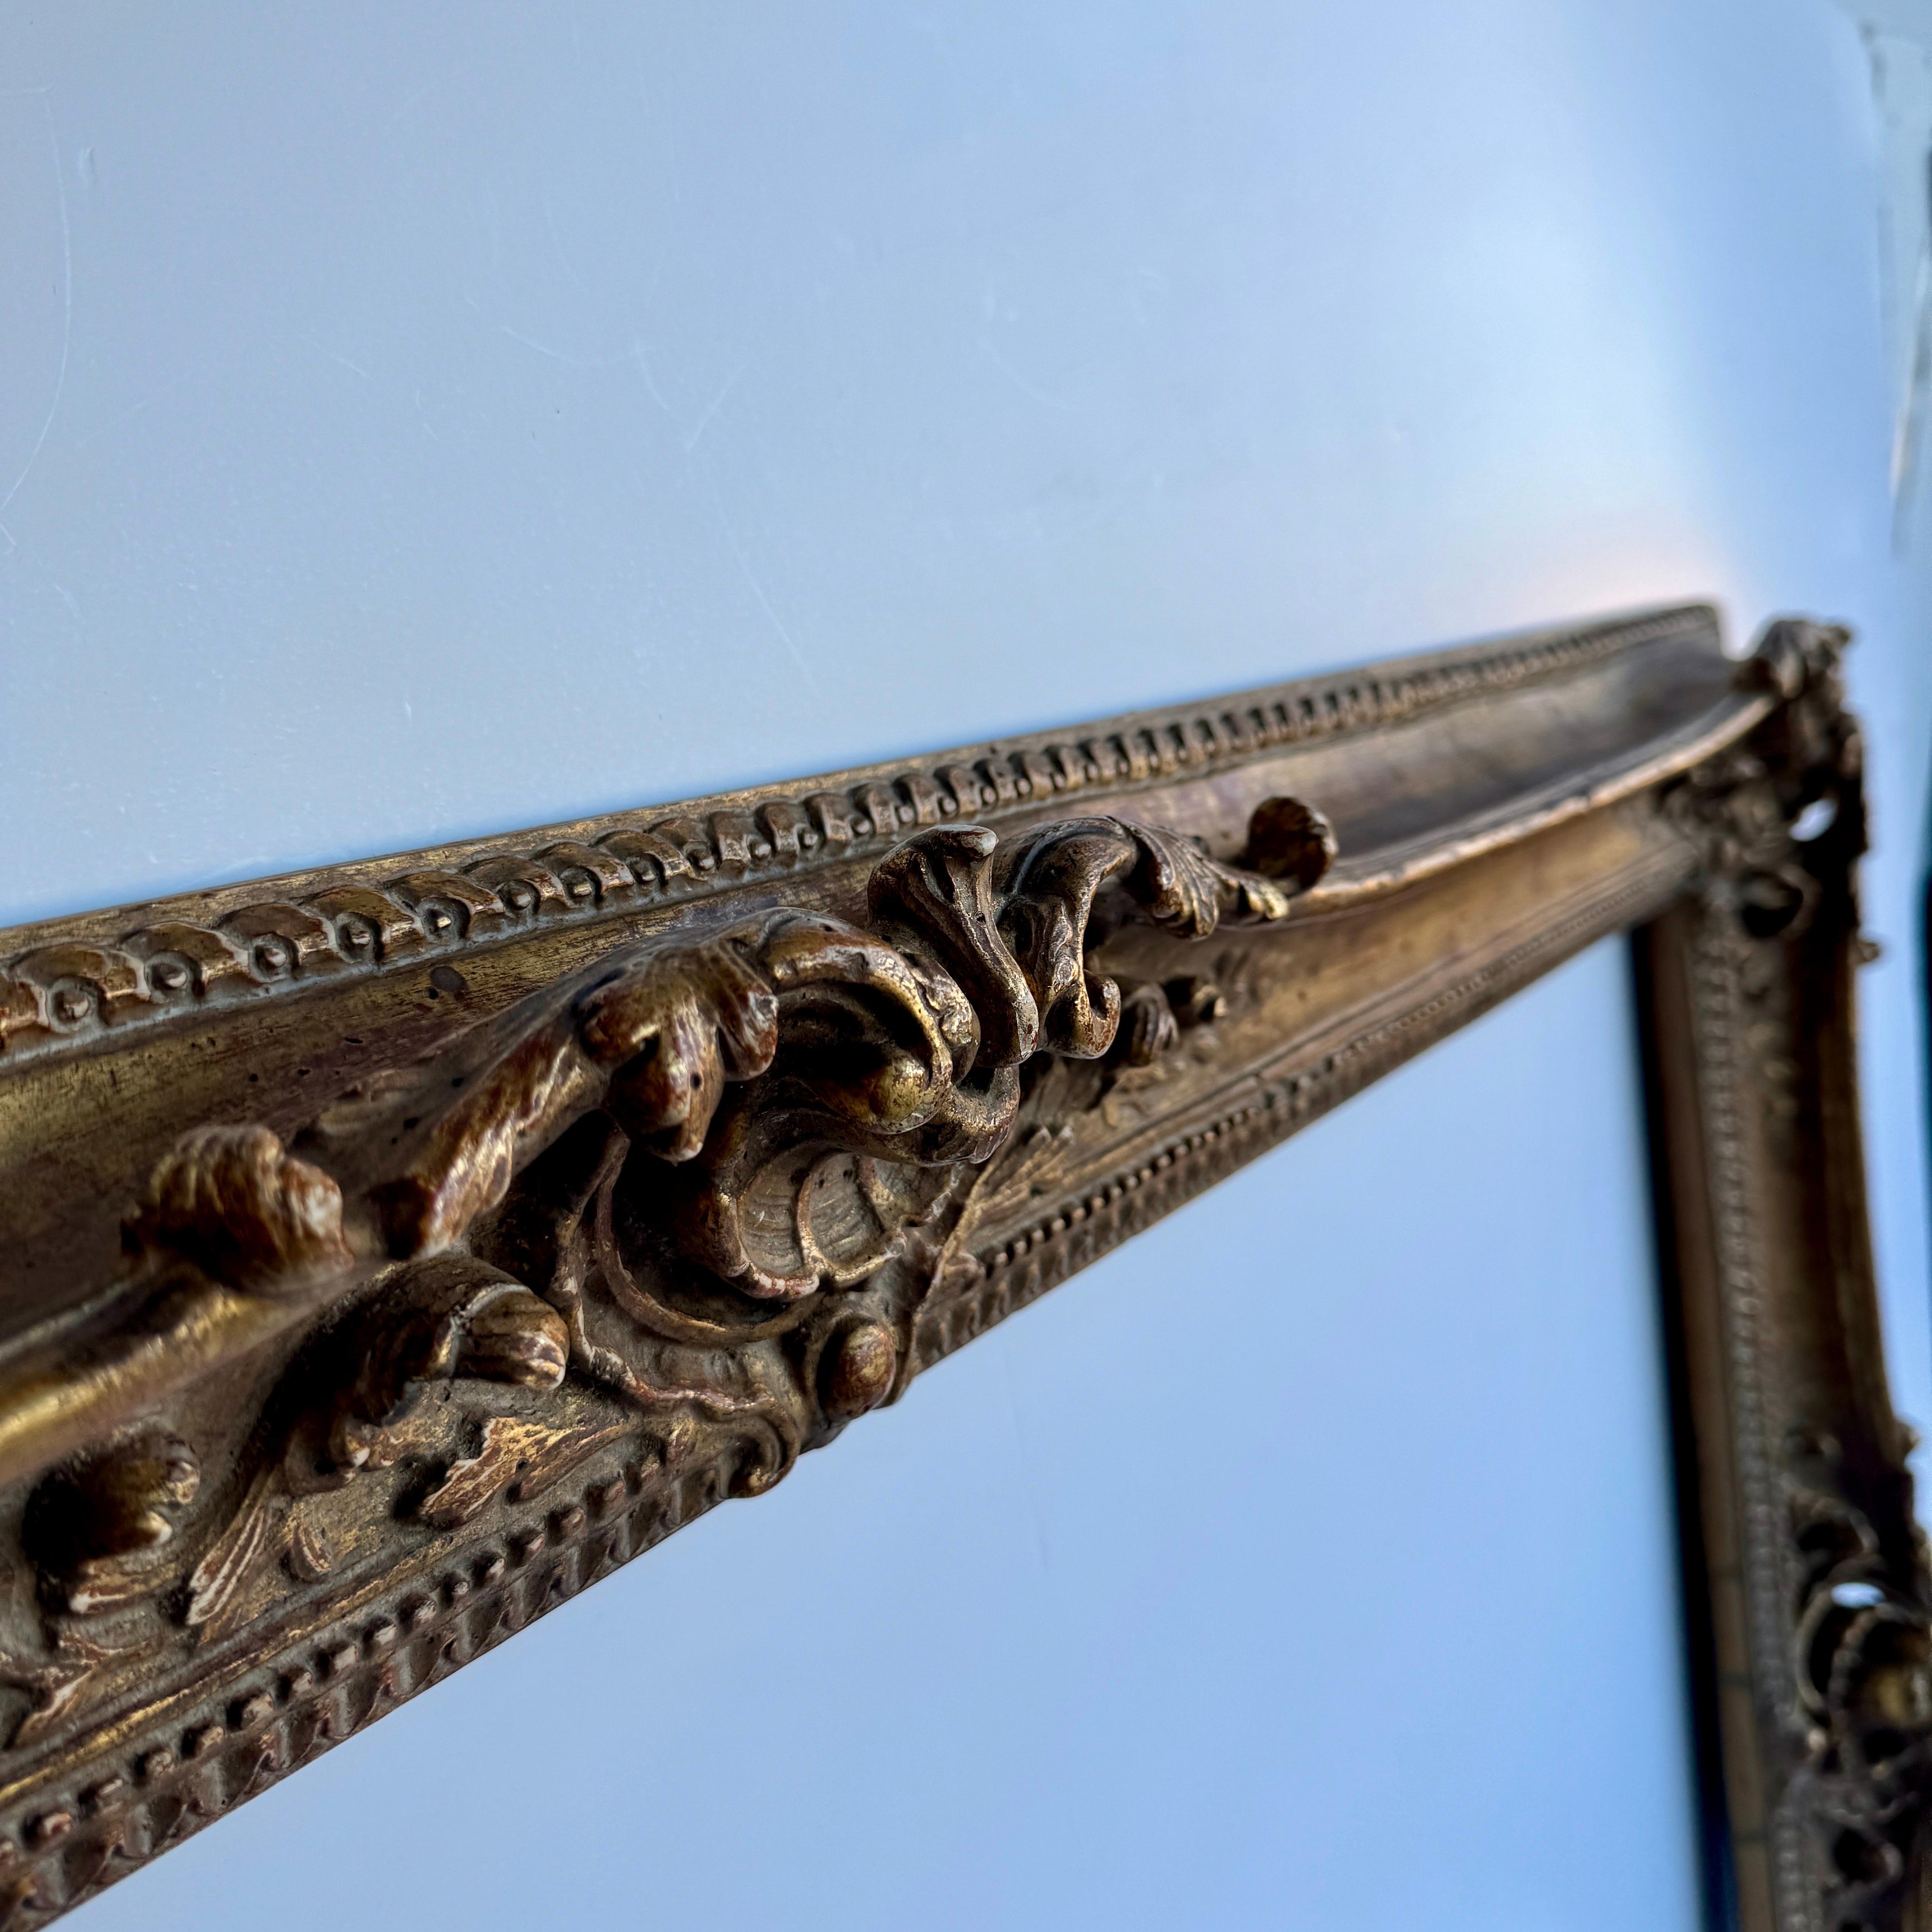 Large Ornate French Rococo Style Carved Ornate Gilt Wood Frame.  

This gorgeous hand-crafted ornate frame has lots of charming details throughout. This substantial piece could be used for an oil painting as well as add a mirror for an incredible